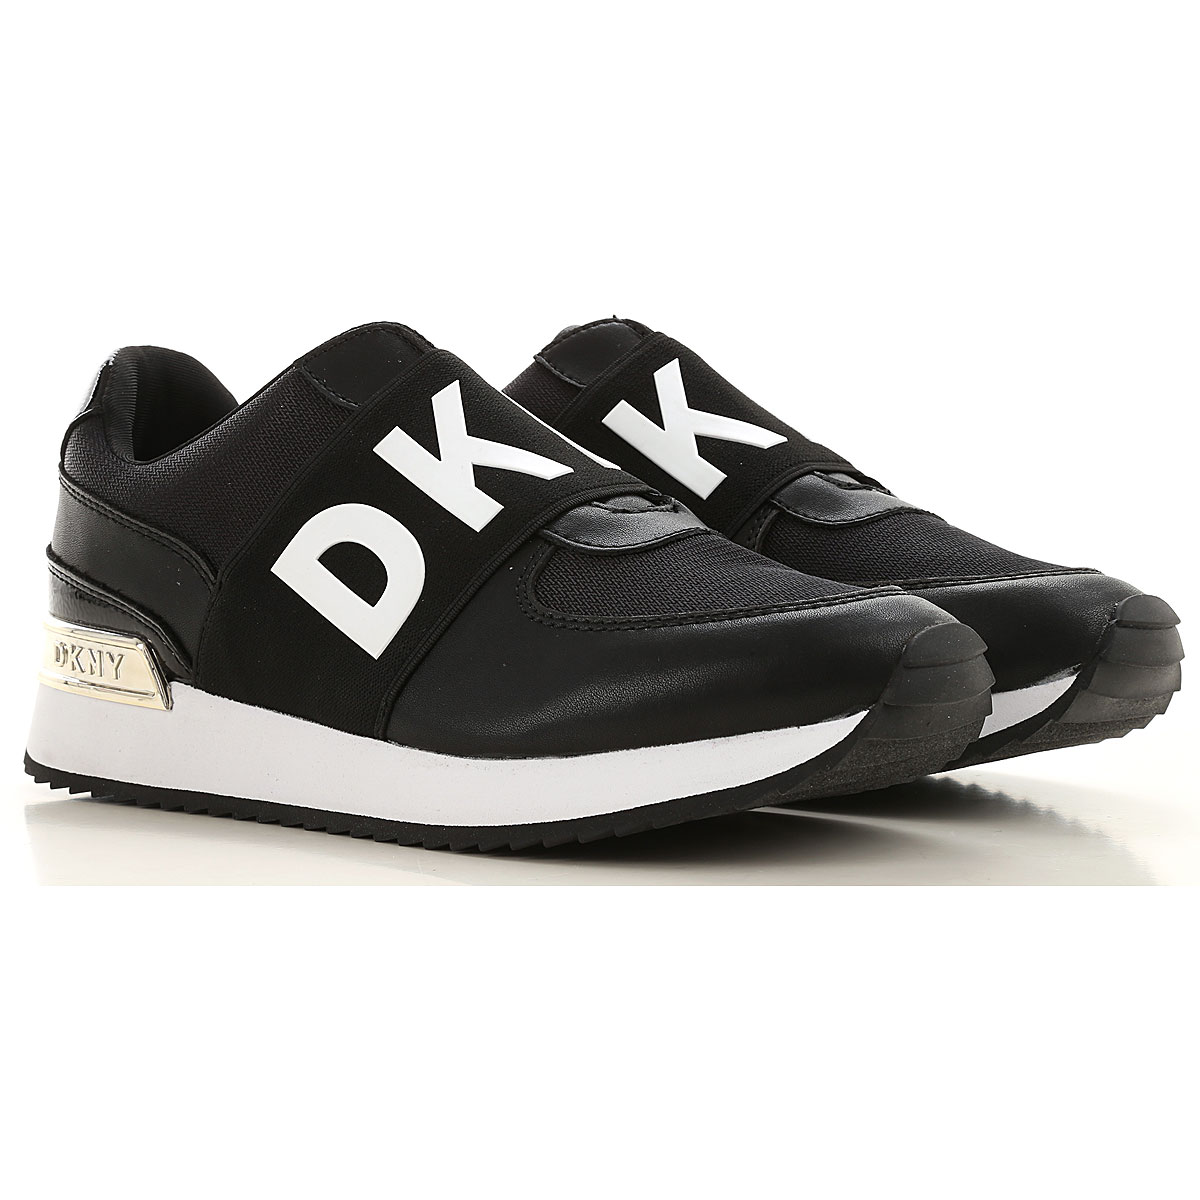 Womens Shoes DKNY, Style code: k3988641--